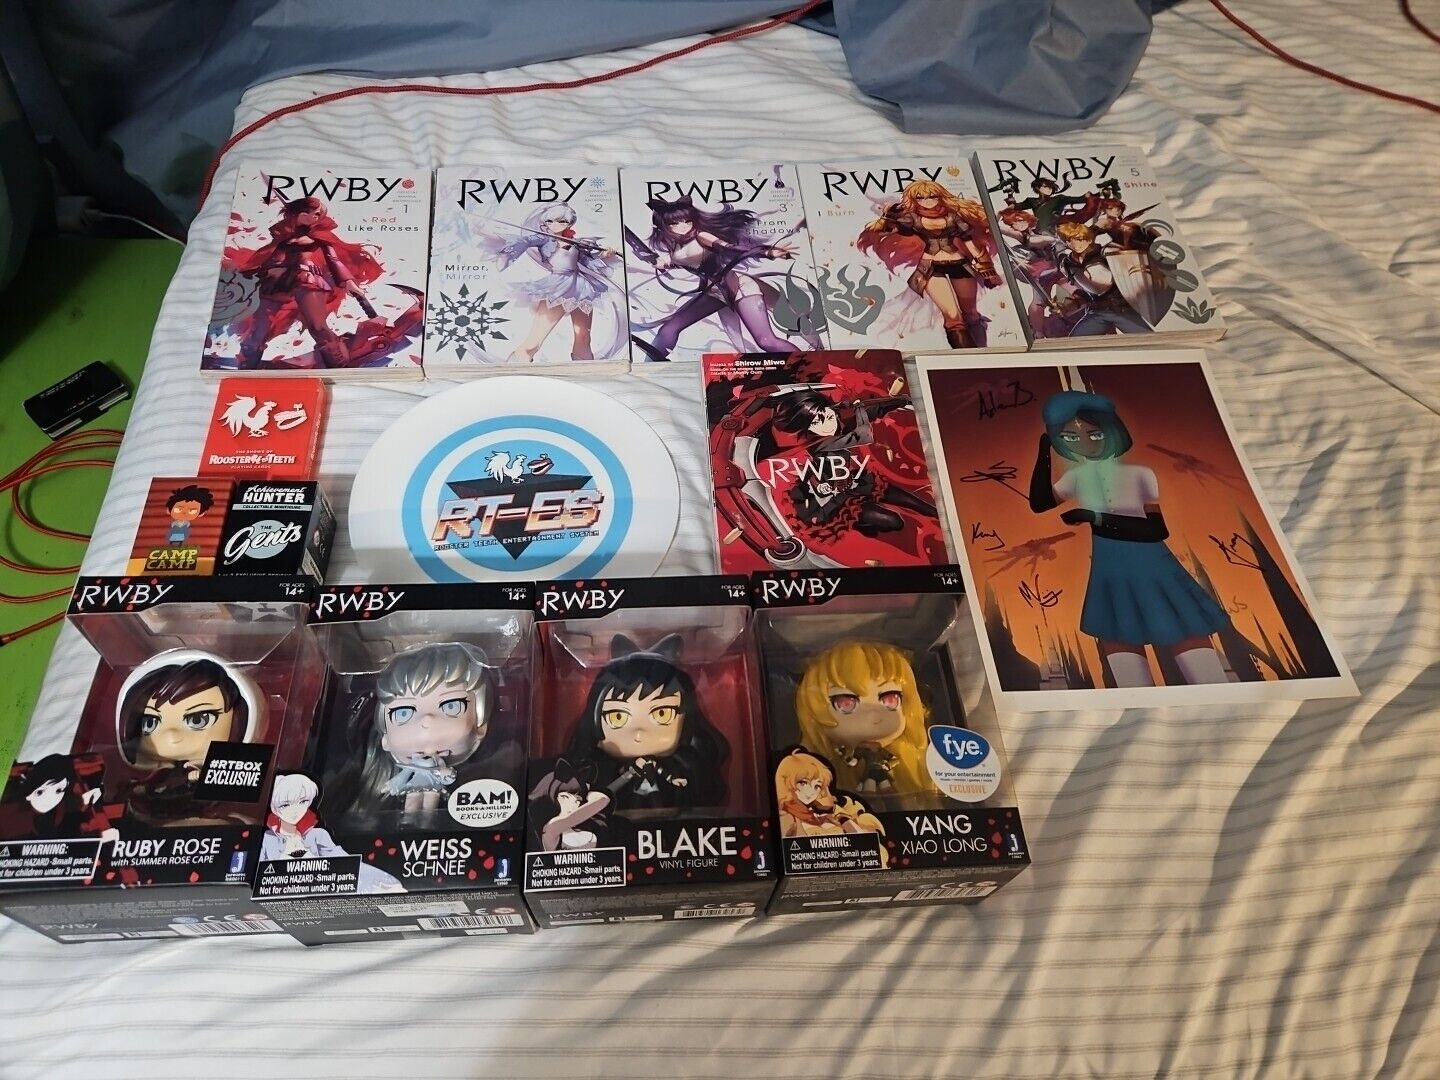 Limited RWBY/Roosterteeth Bundle: With Signed Merch (Read Description)